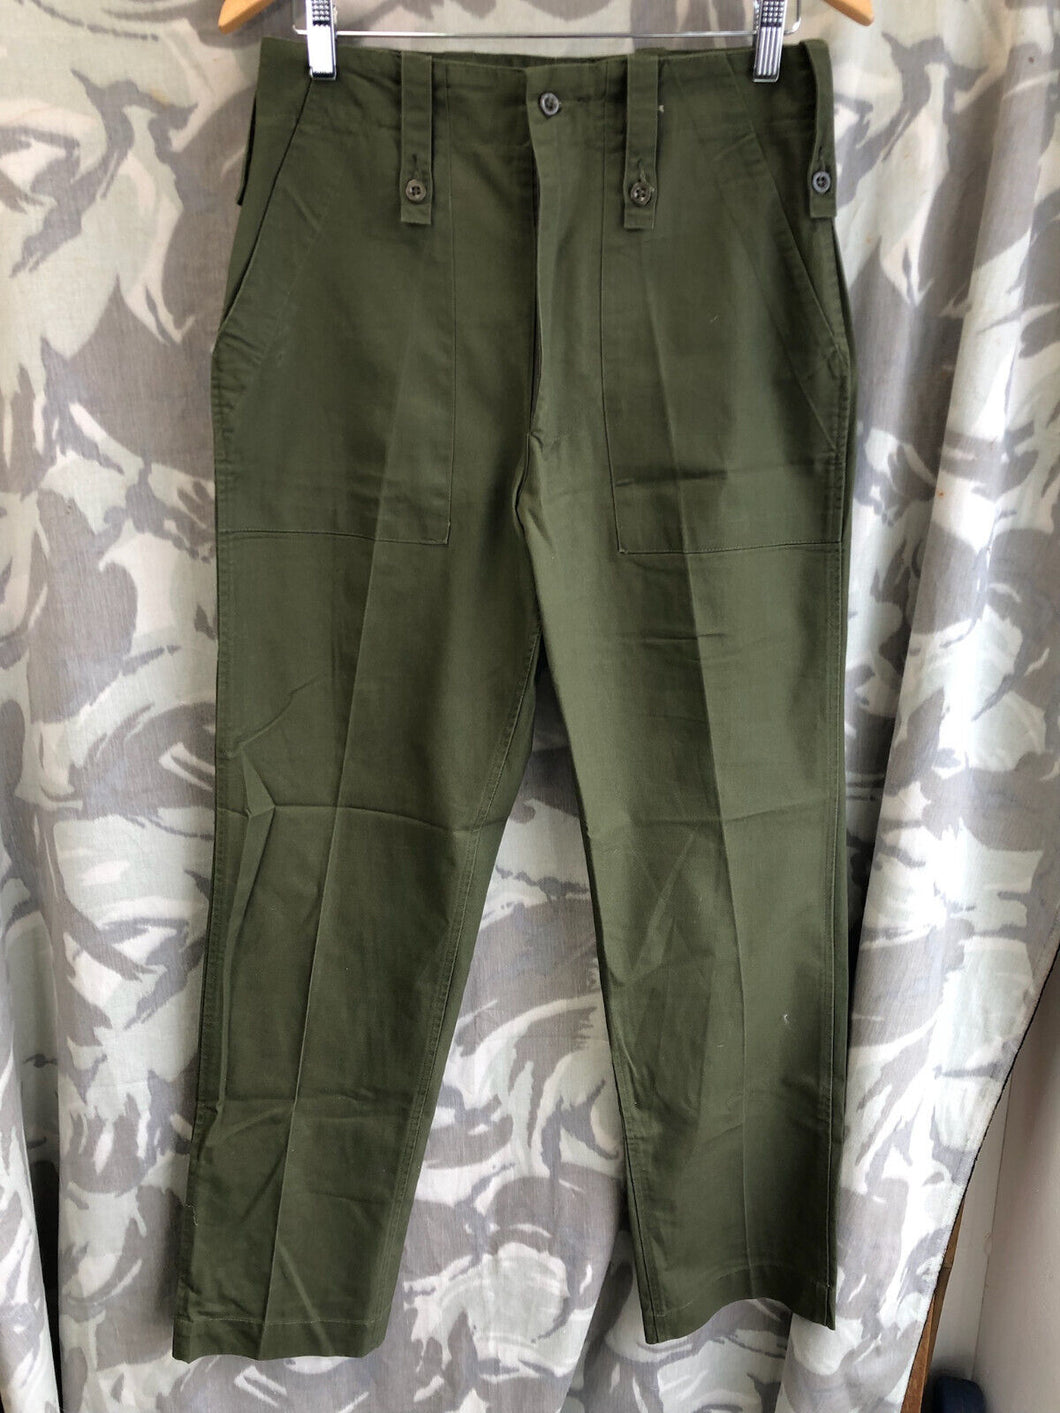 Genuine British Army Olive Green Lightweight Fatigue Combat Trousers - 72/80/96